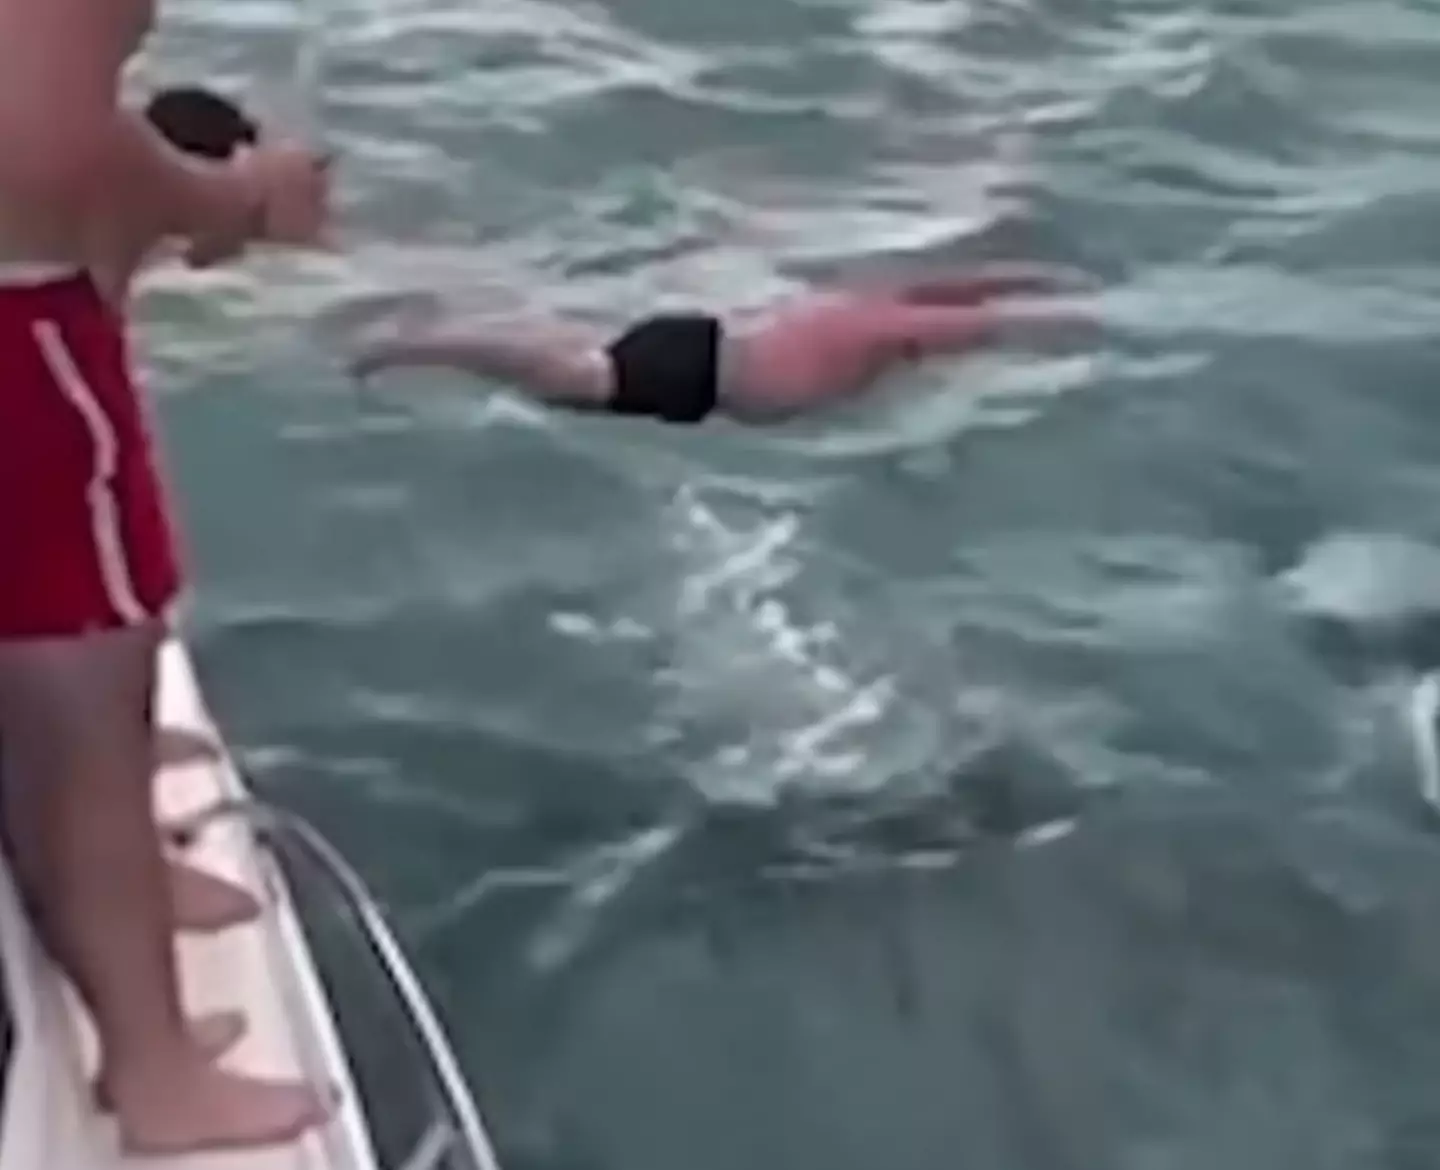 He was caught after footage of him jumping into the water made it onto social media. (Instagram/docgovtnz)